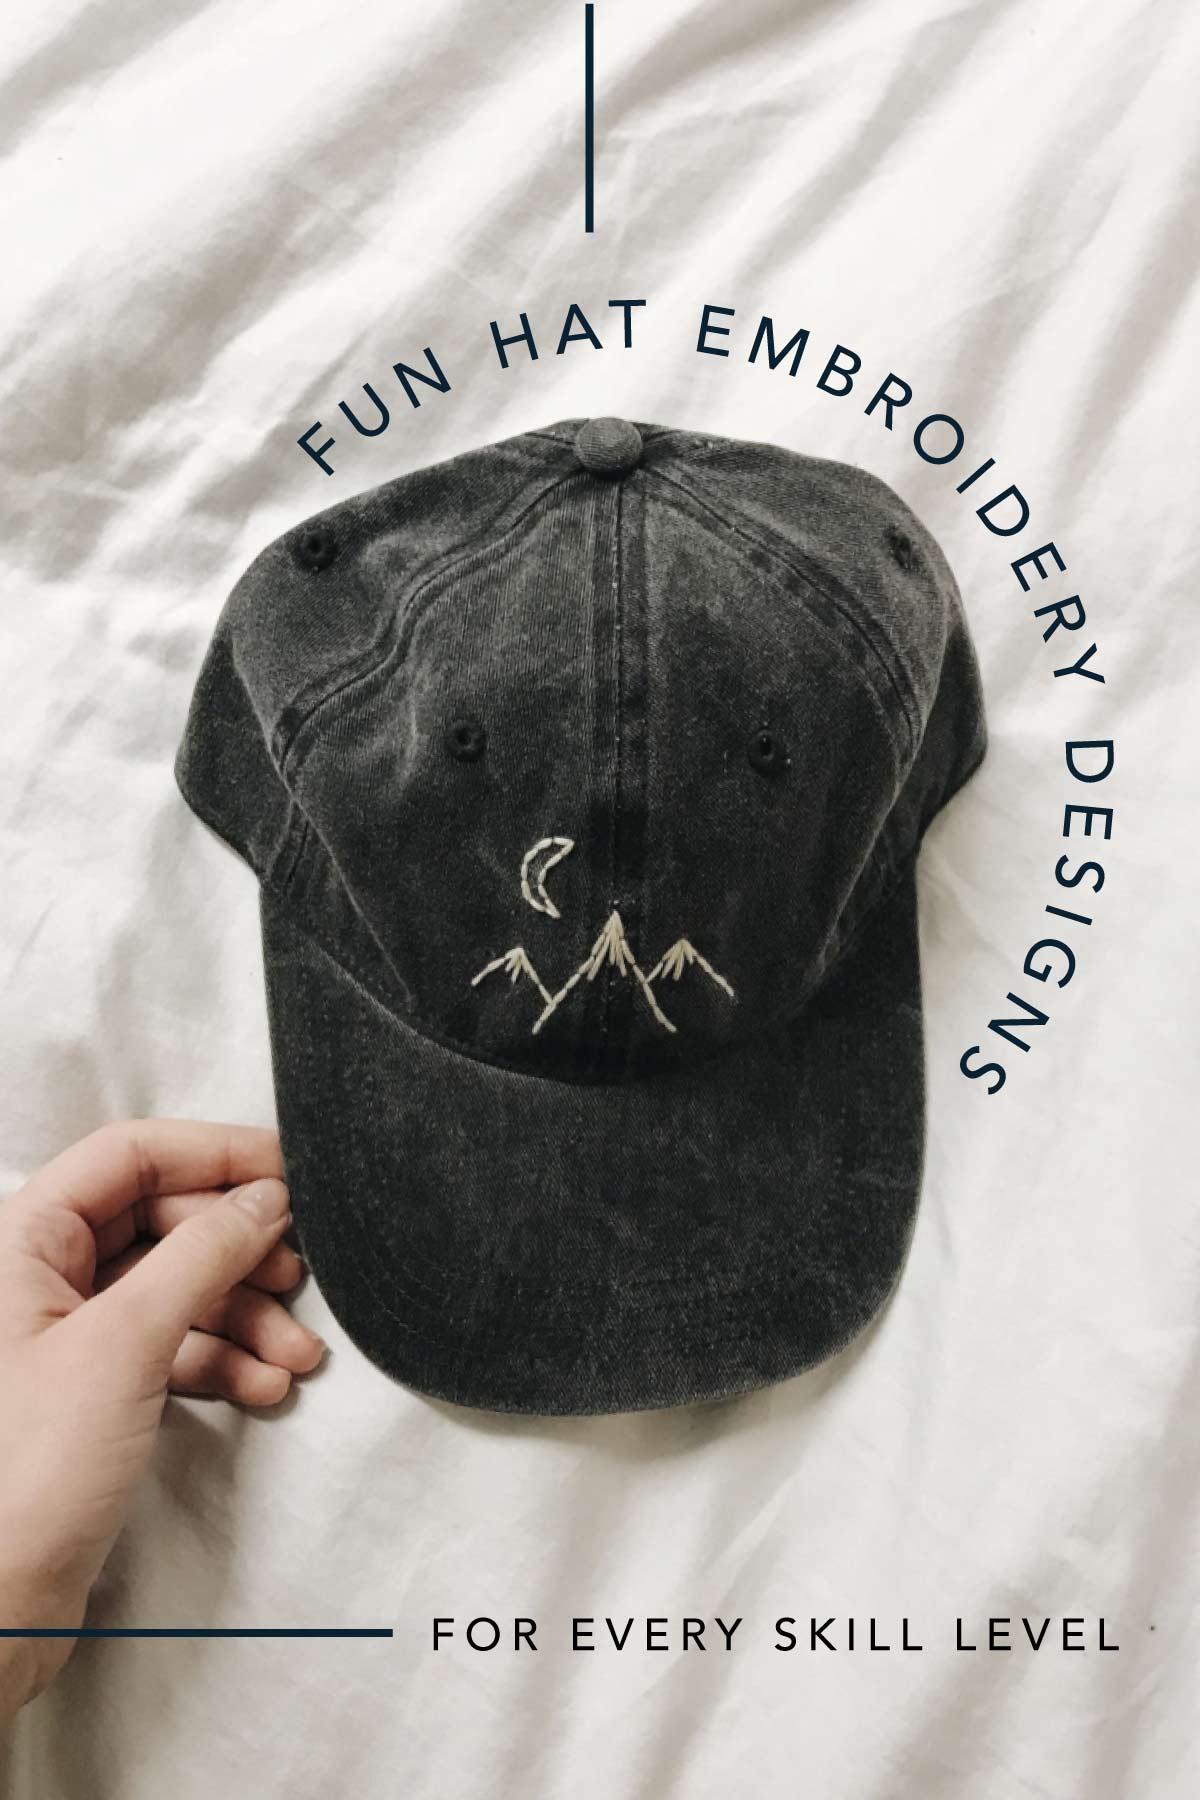 Fun Hat Embroidery Designs